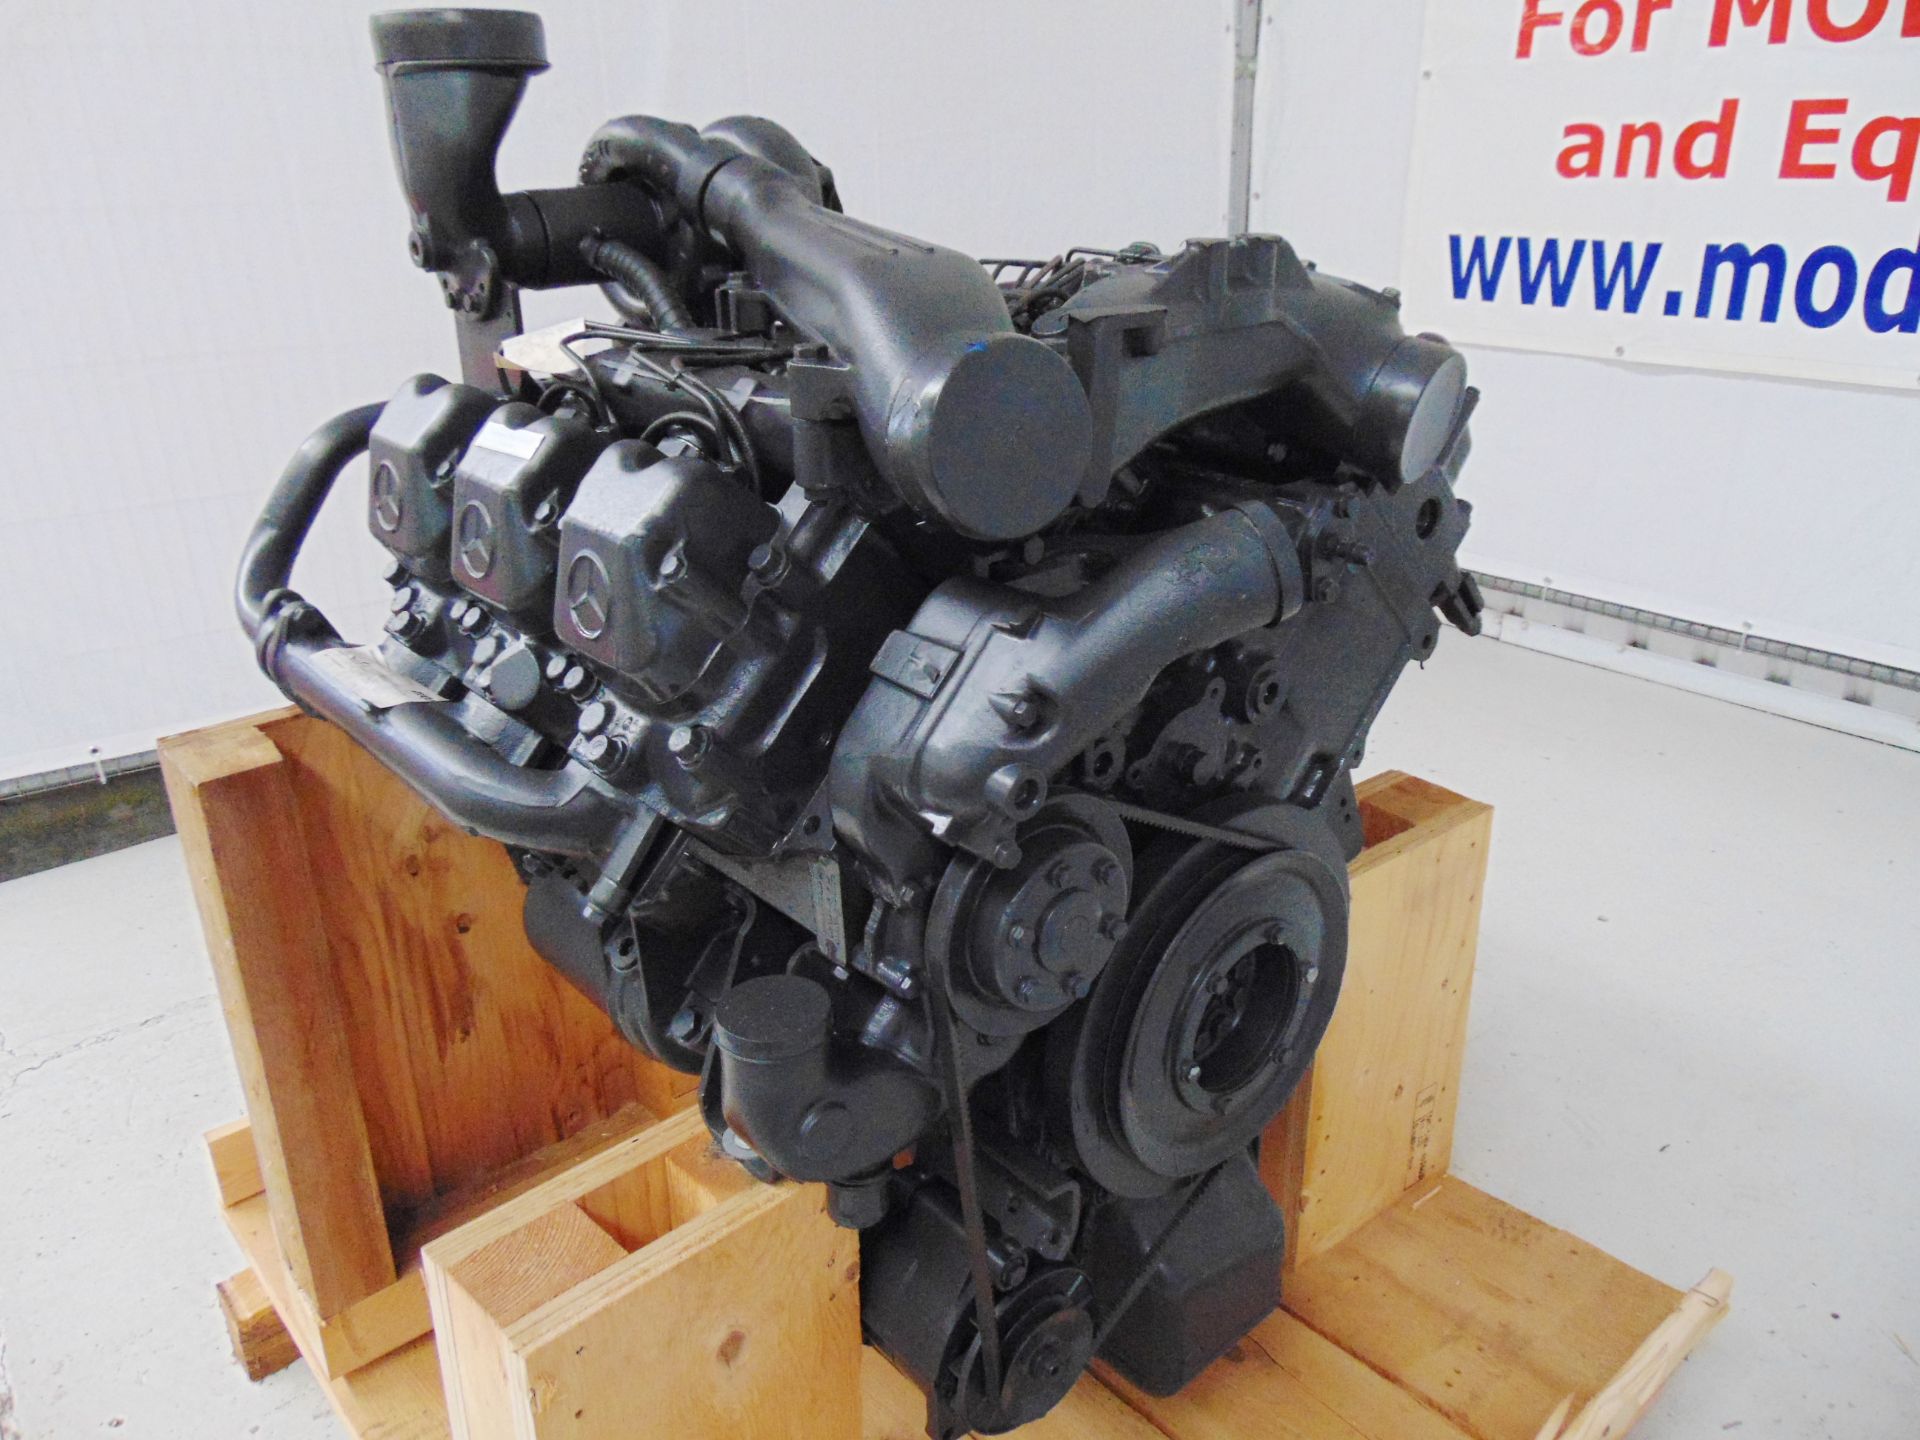 Factory Reconditioned Mercedes-Benz OM441 V6 Turbo Diesel Engine - Image 7 of 17